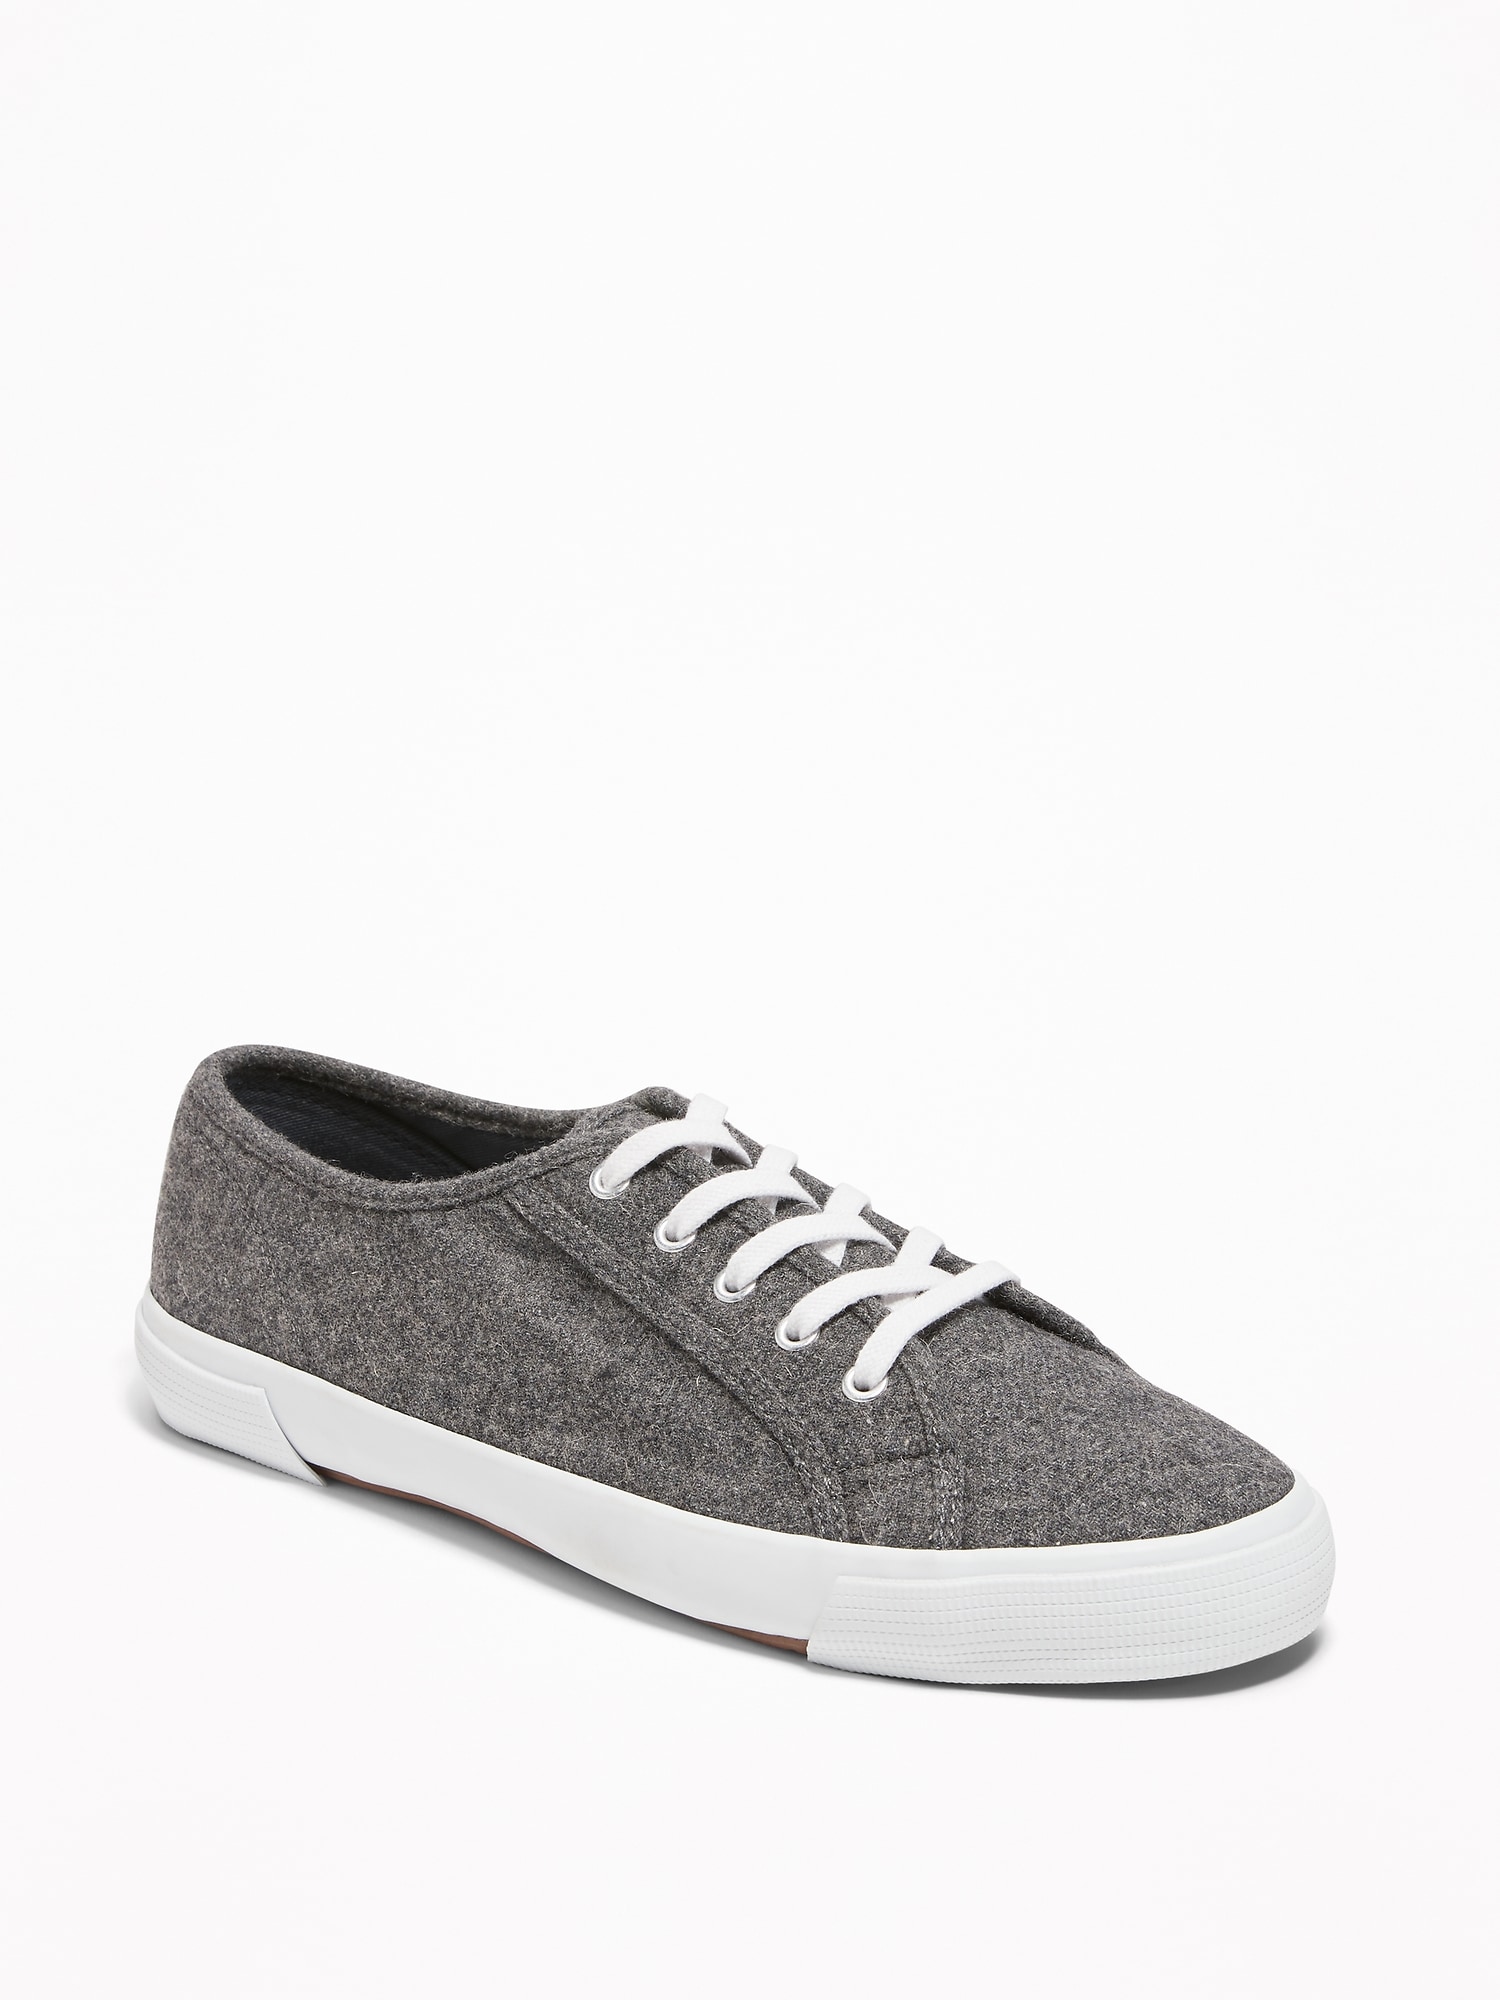 Wool-Blend Lace-Up Sneakers for Women | Old Navy